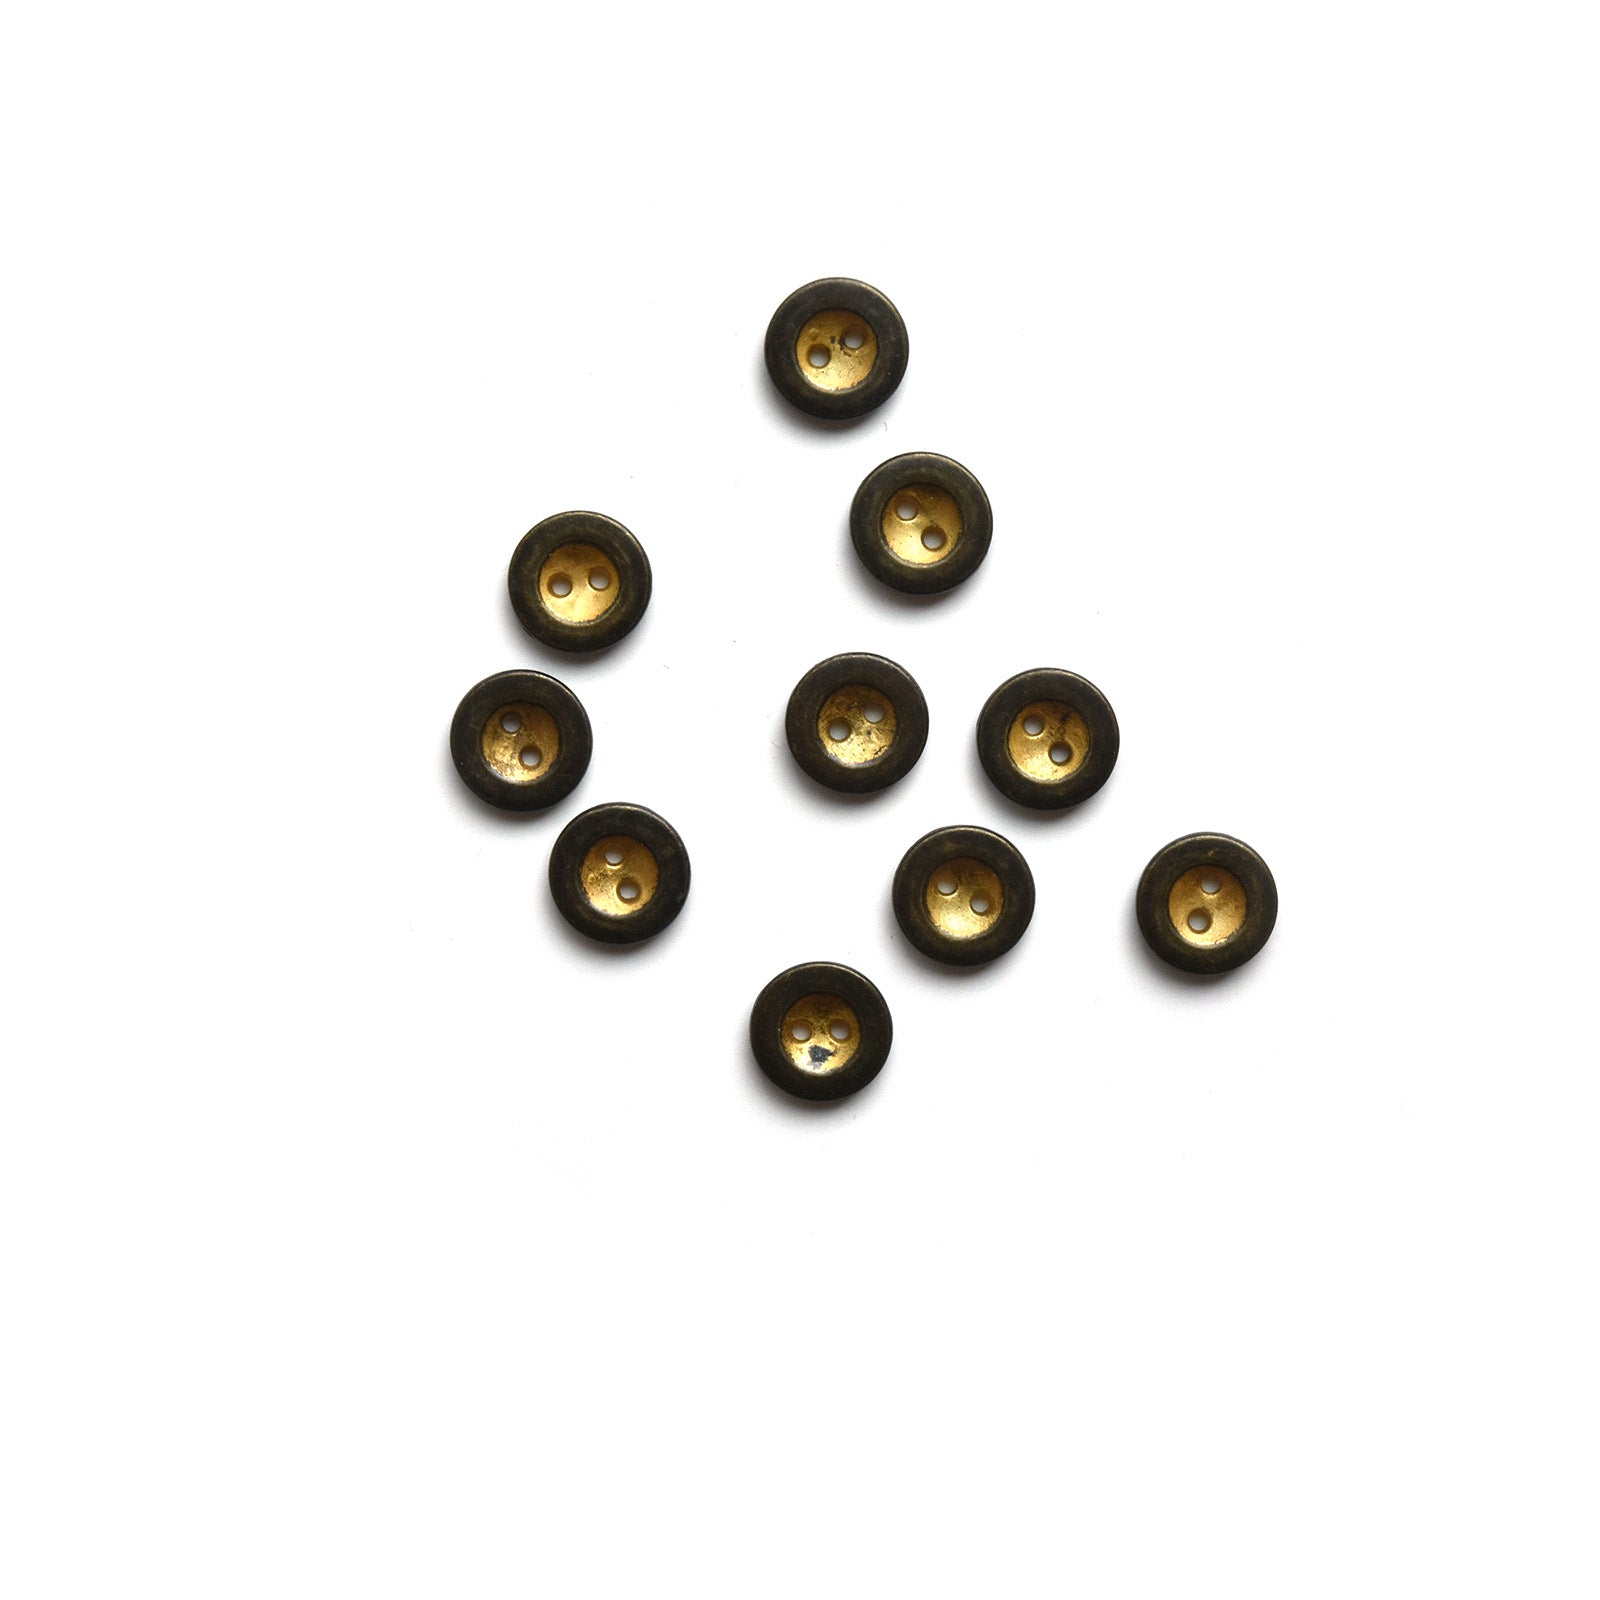 Rimmed Metal Buttons - Multiple Colors